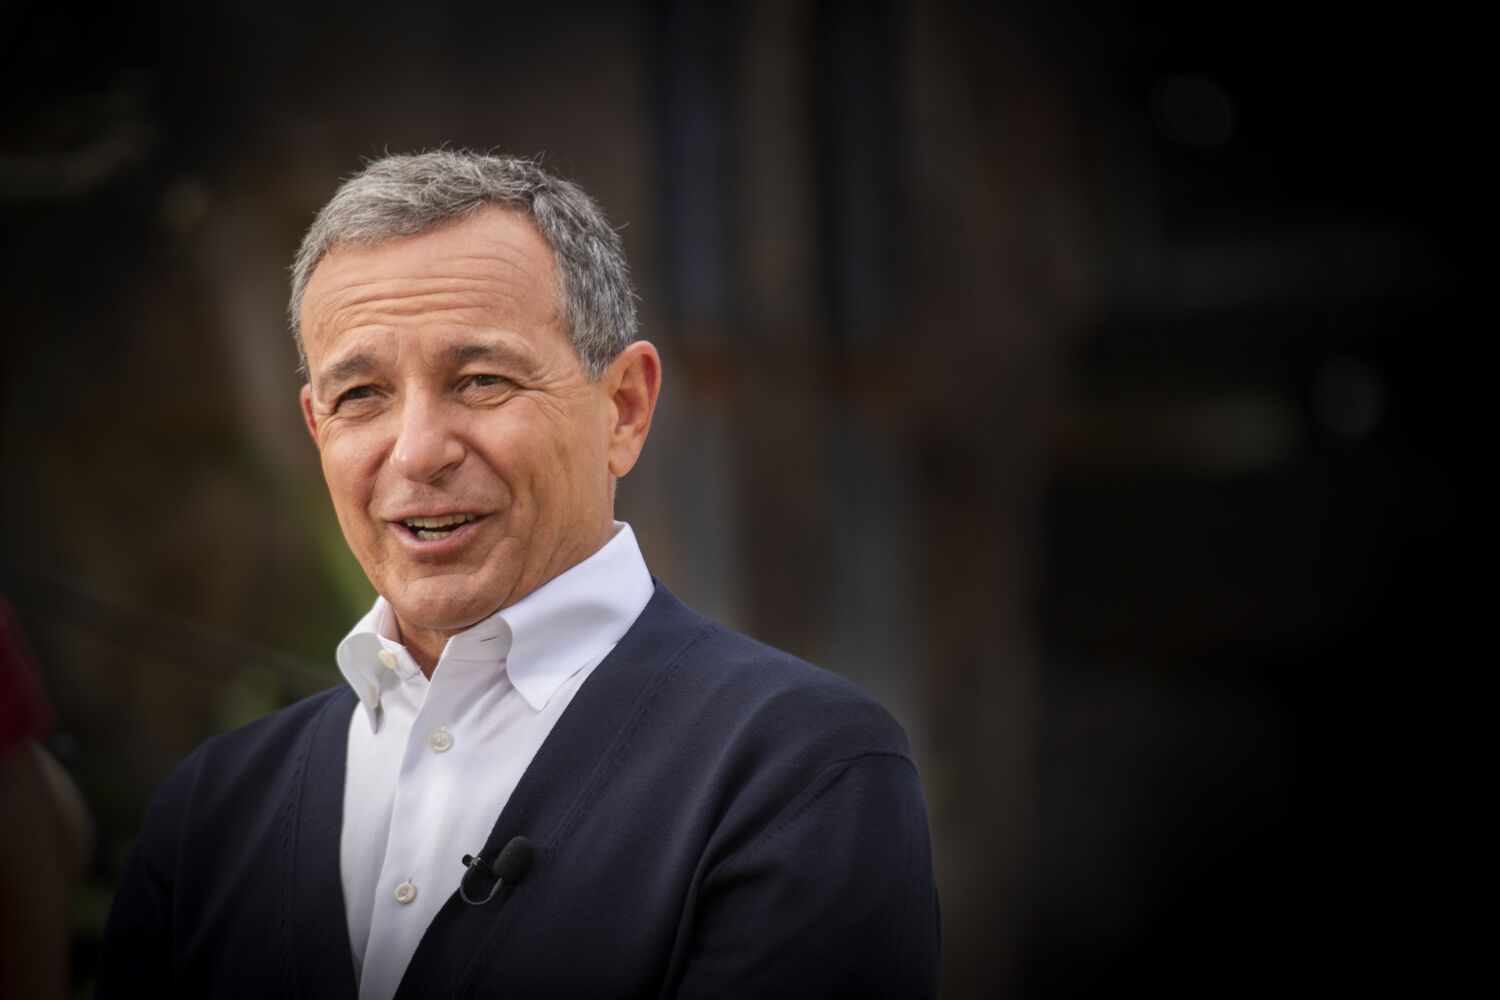 Iger says he won't sell Disney to Apple in his first town hall after CEO shake-up